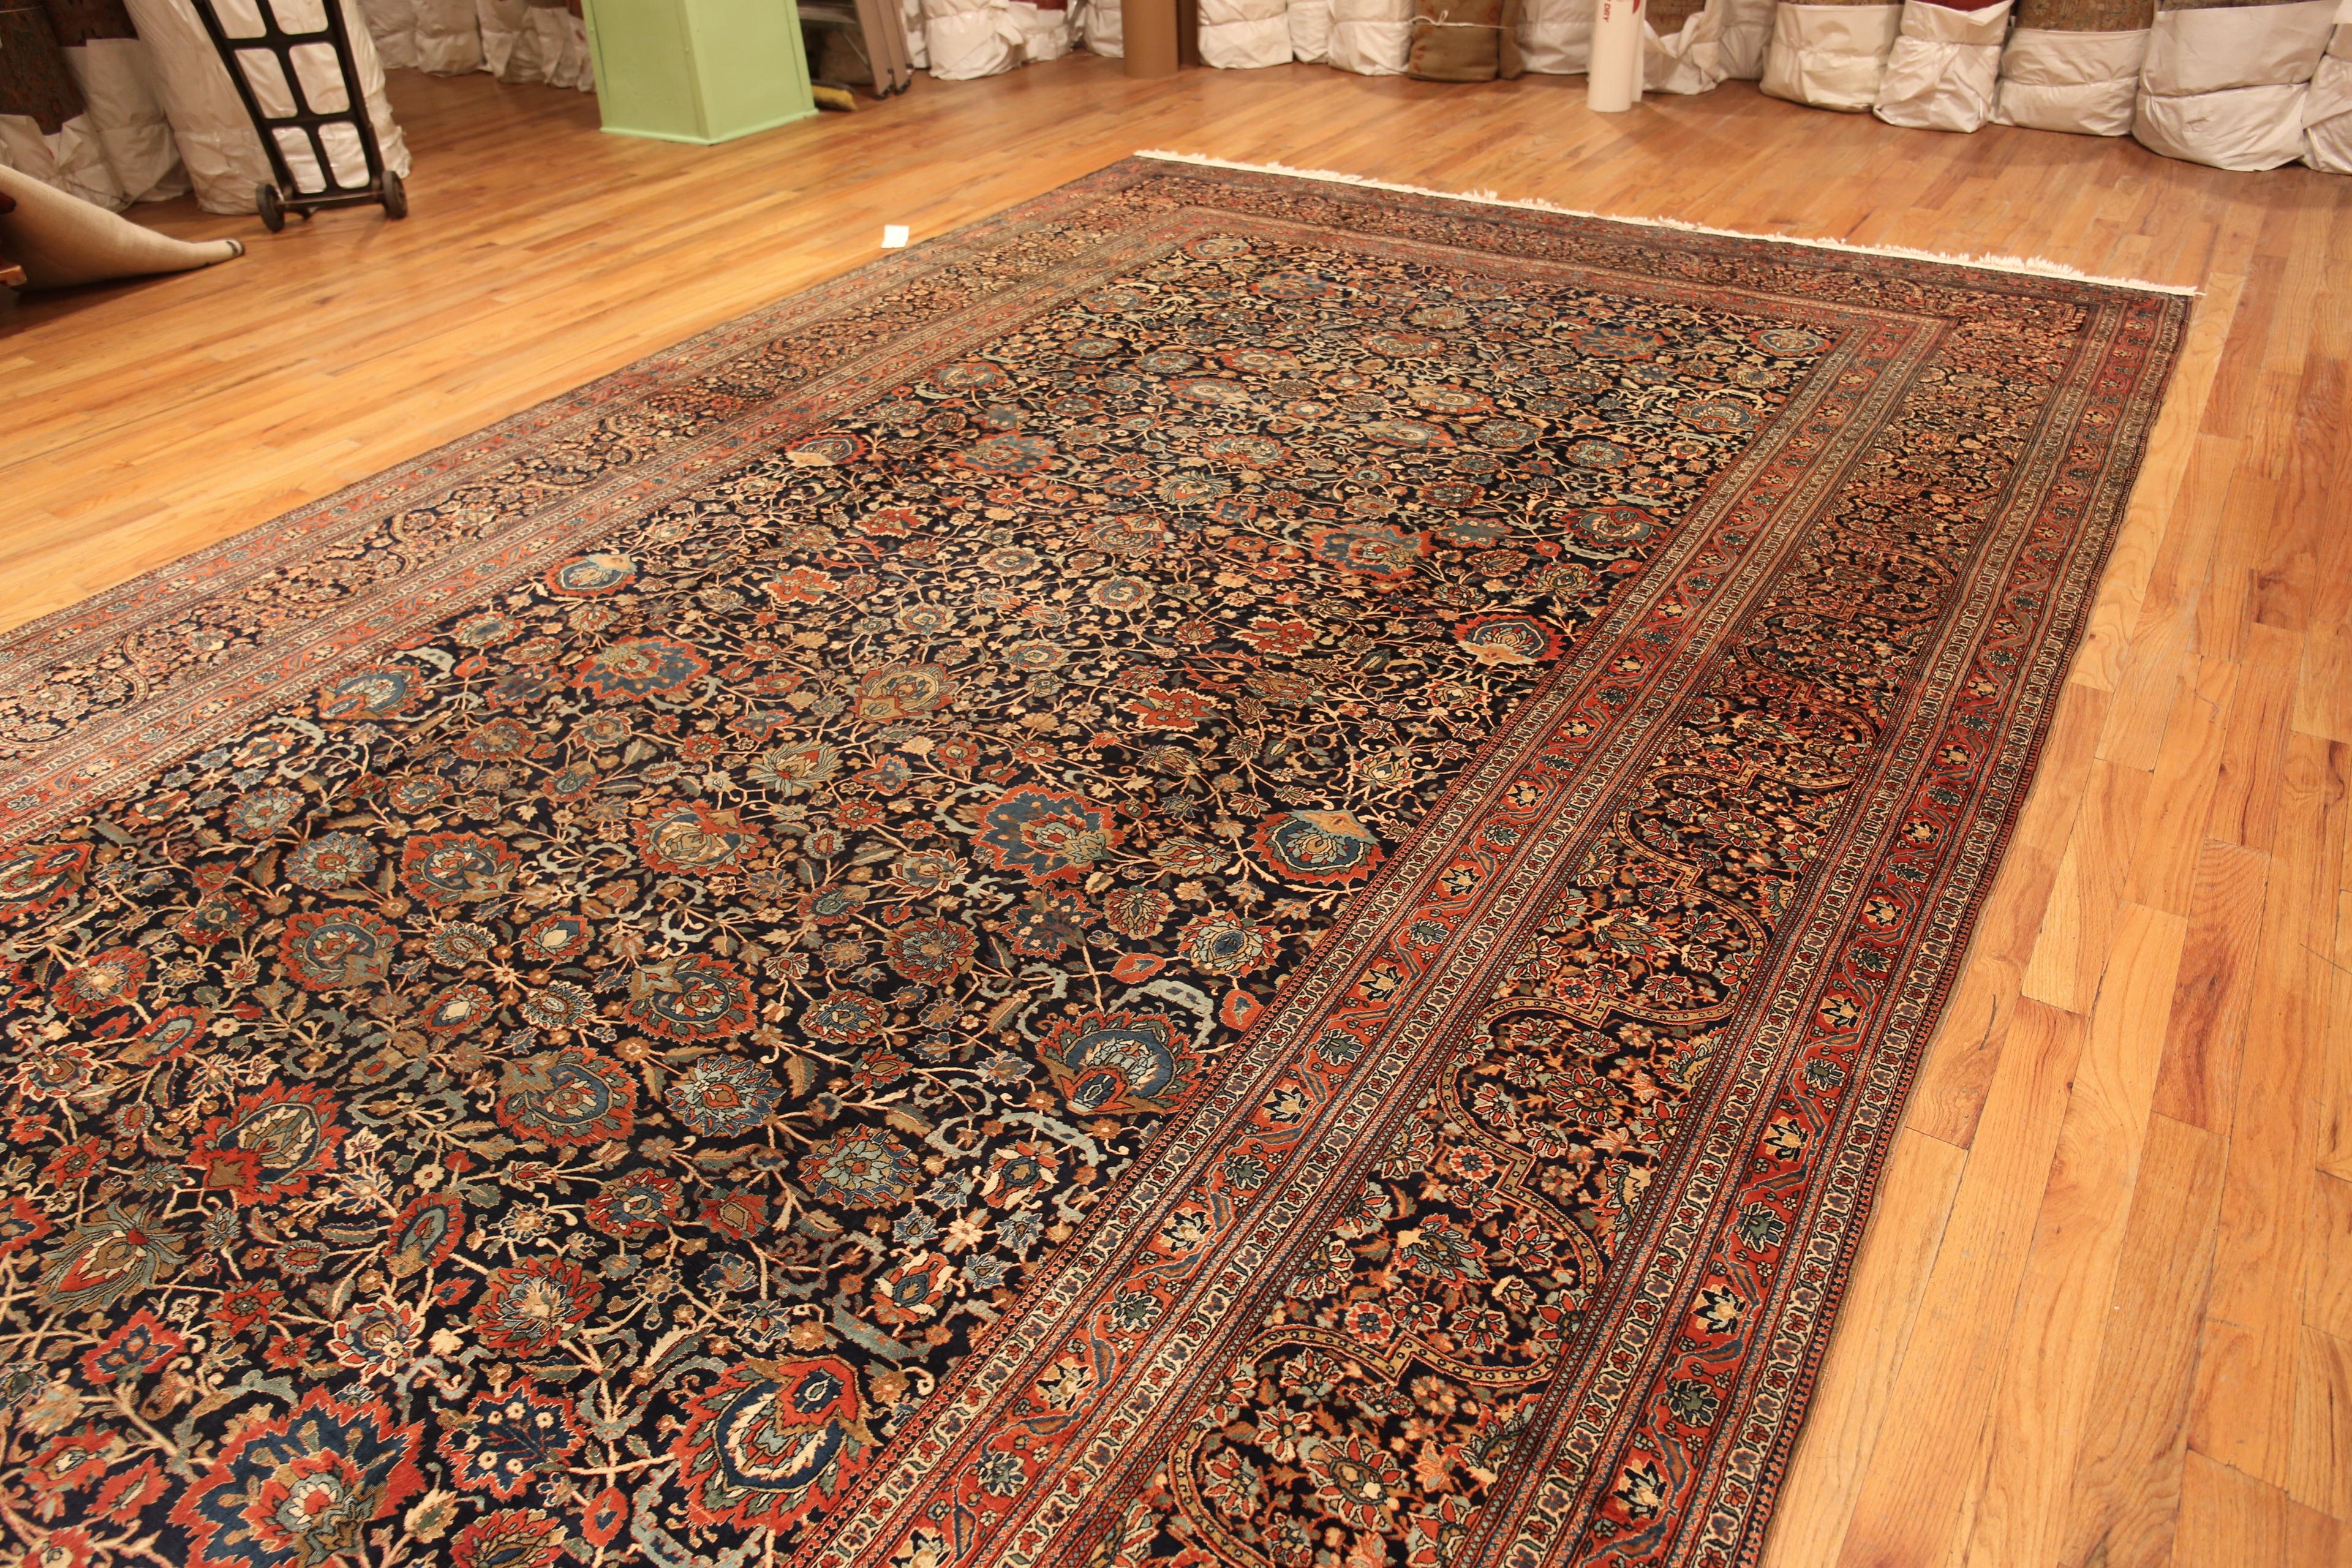 Large Antique Persian Mohtasham Kashan Rug, Country of origin: Persia, Circa date: 1880. Size: 11 ft x 18 ft 9 in (3.35 m x 5.71 m)

